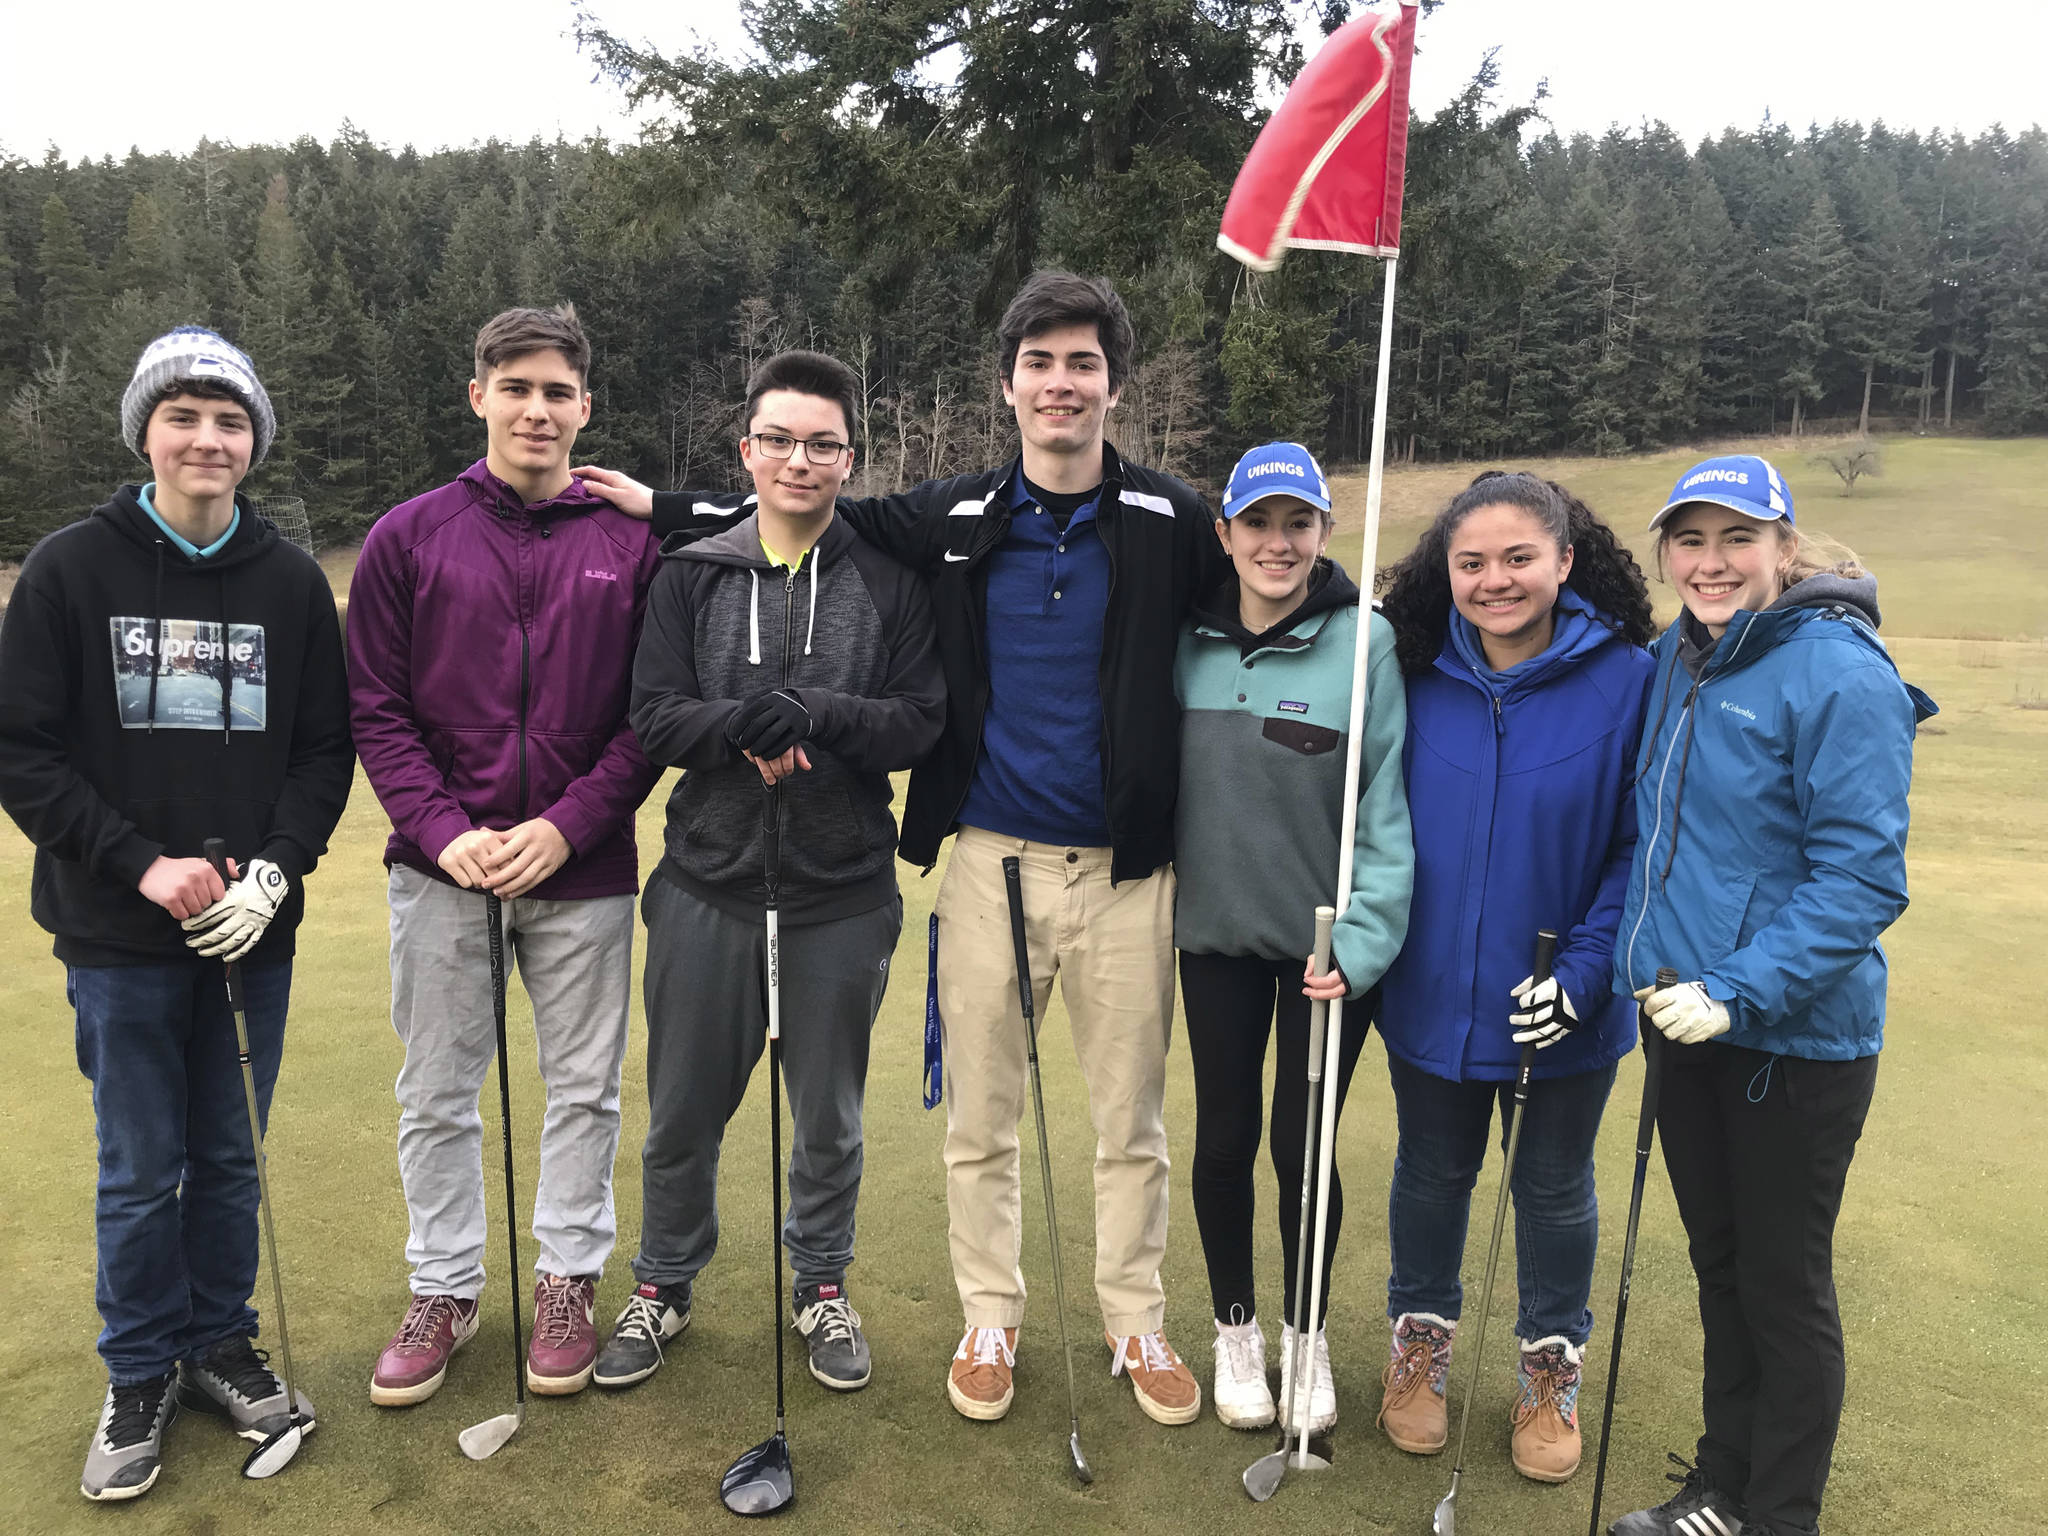 &lt;style type="text/css"&gt;&lt;/style&gt;                                Contributed photo                                 Viking golf team, left to right: Kai Ross, Max Clark-Matilla, Joseph Brewer, Ewan Lister, Zoe Lewis-Shunk, Tayla Malo and Maia Lewis-Shunk.